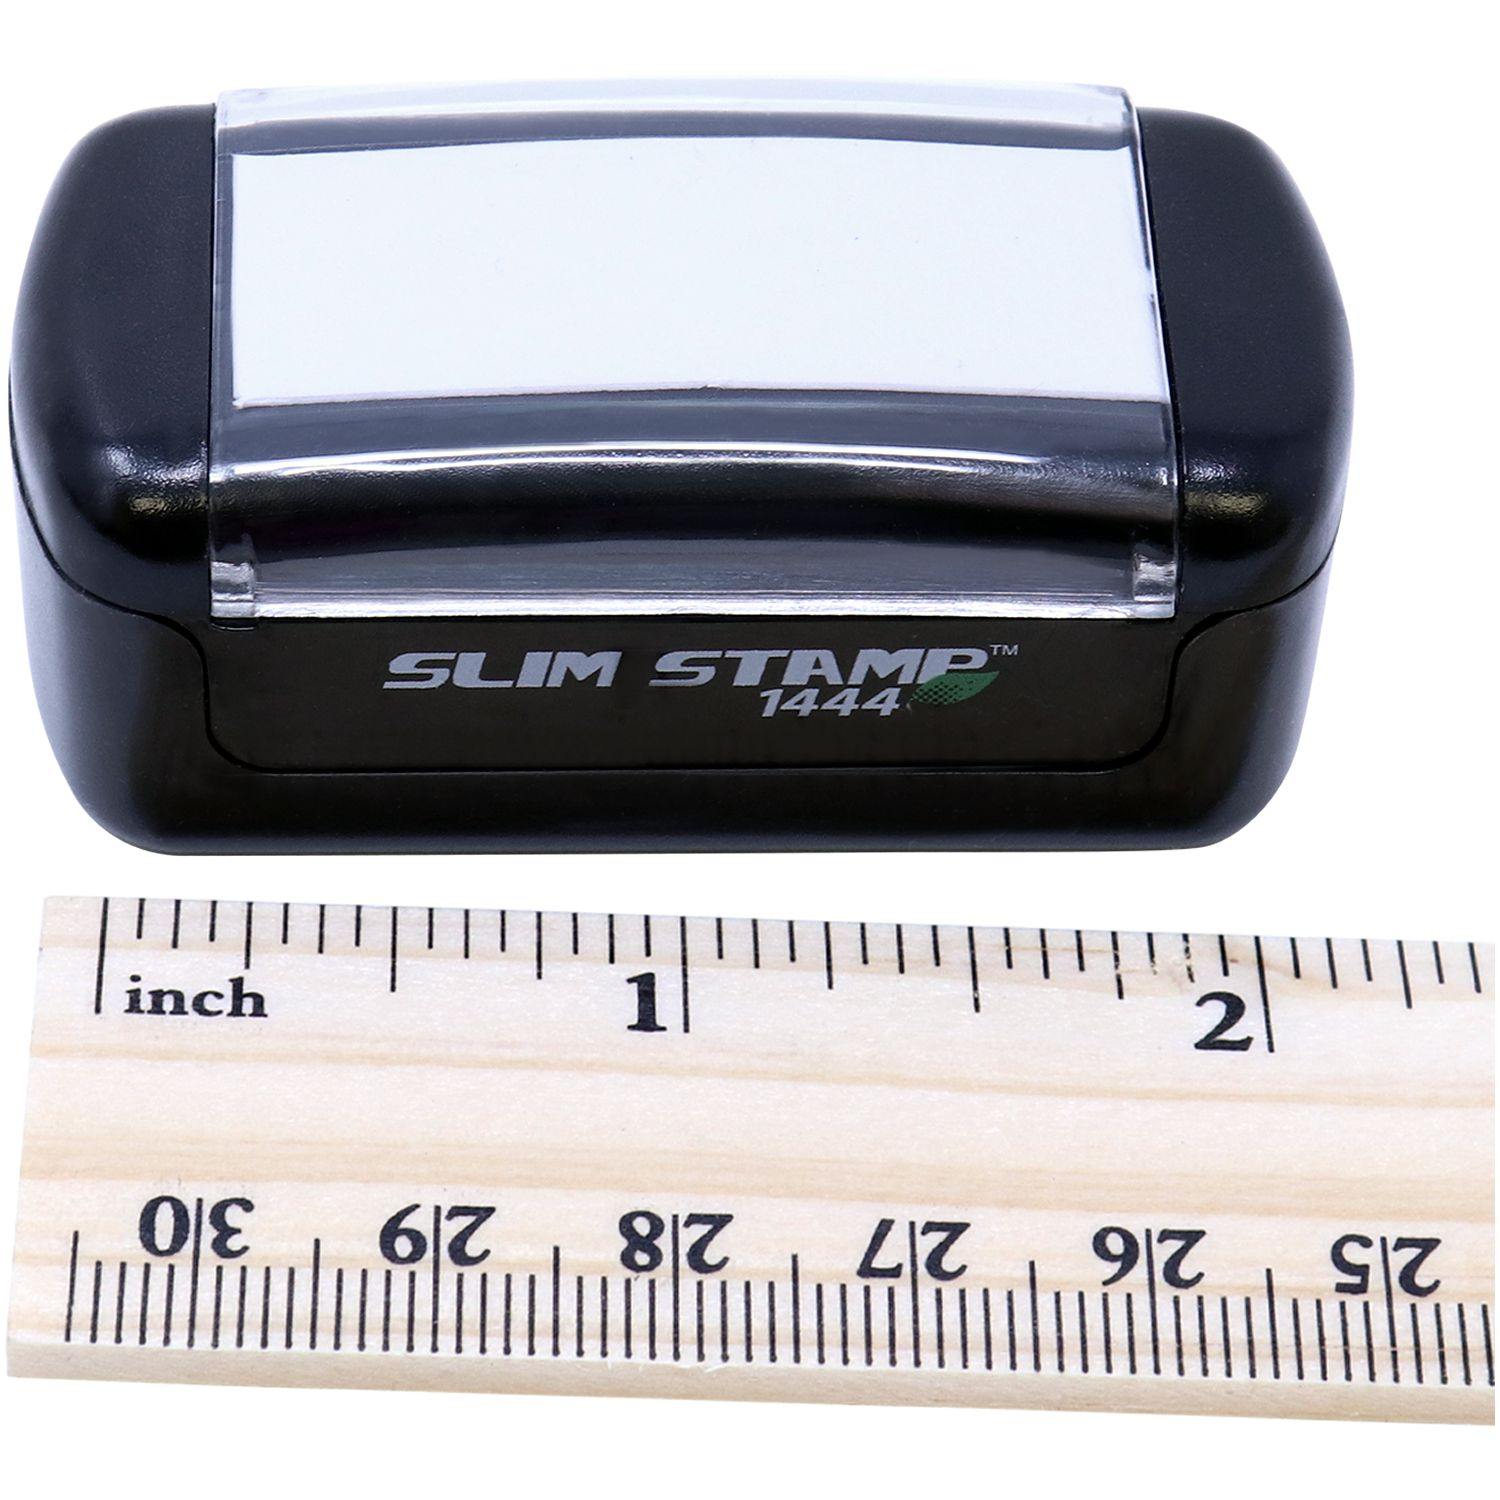 Measurement Slim Pre-Inked Client's Copy Stamp with Ruler